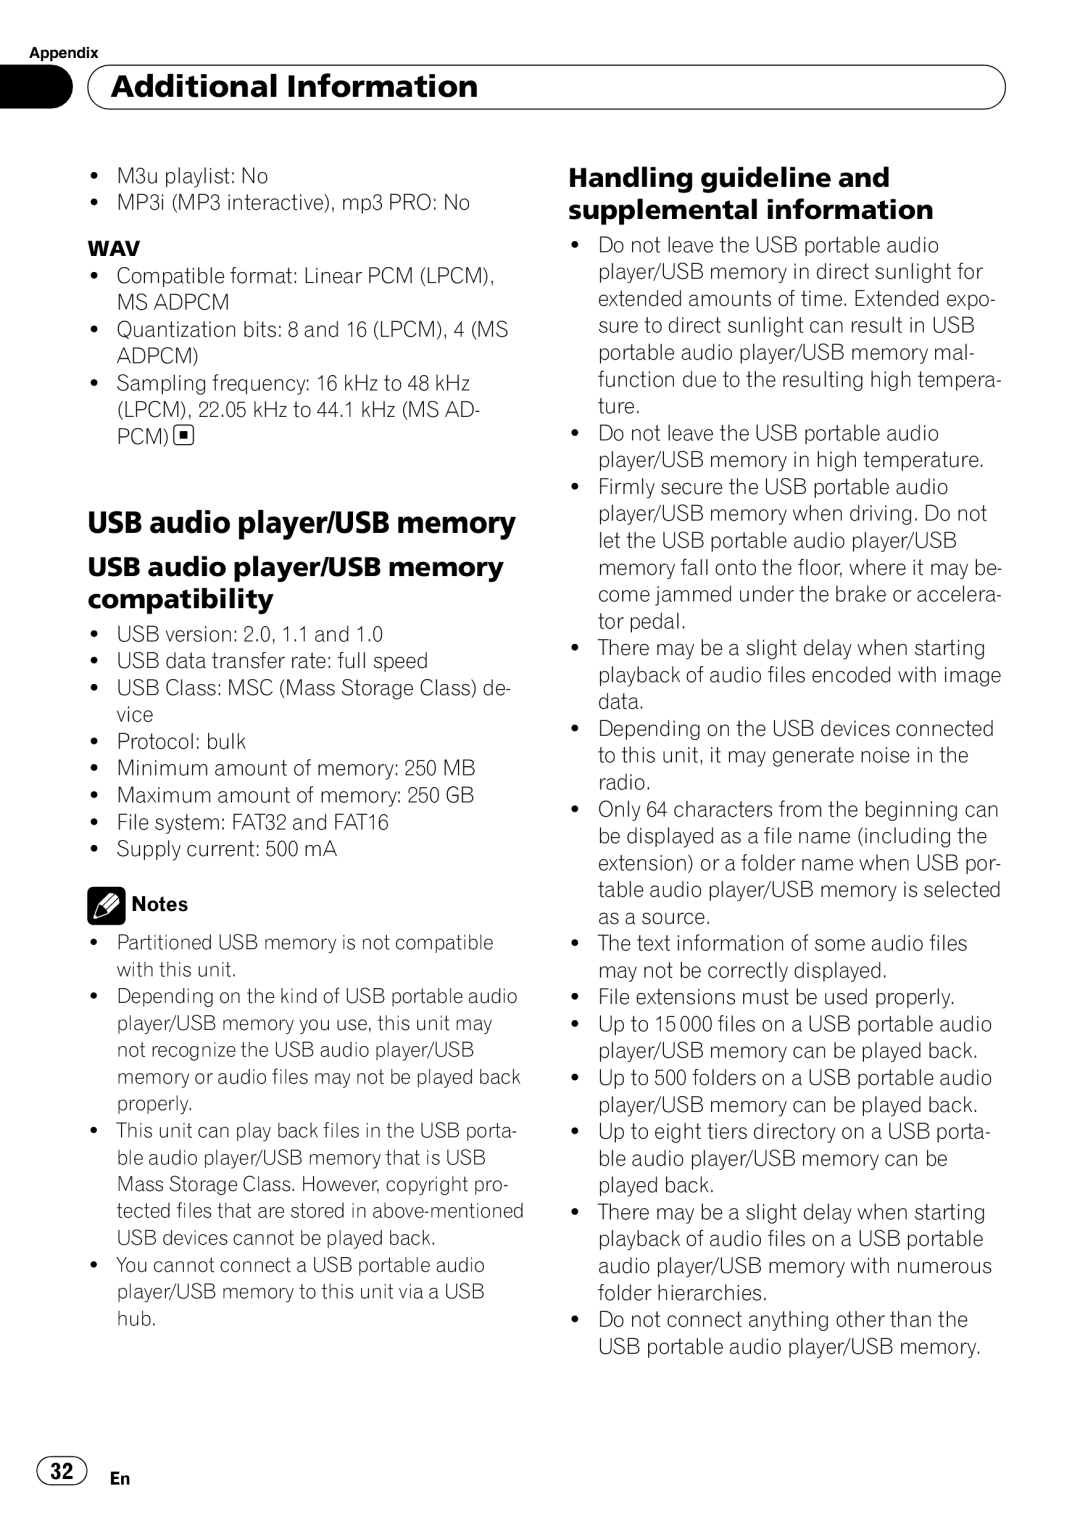 Pioneer DEH-5000UB USB audio player/USB memory compatibility, Handling guideline and supplemental information 